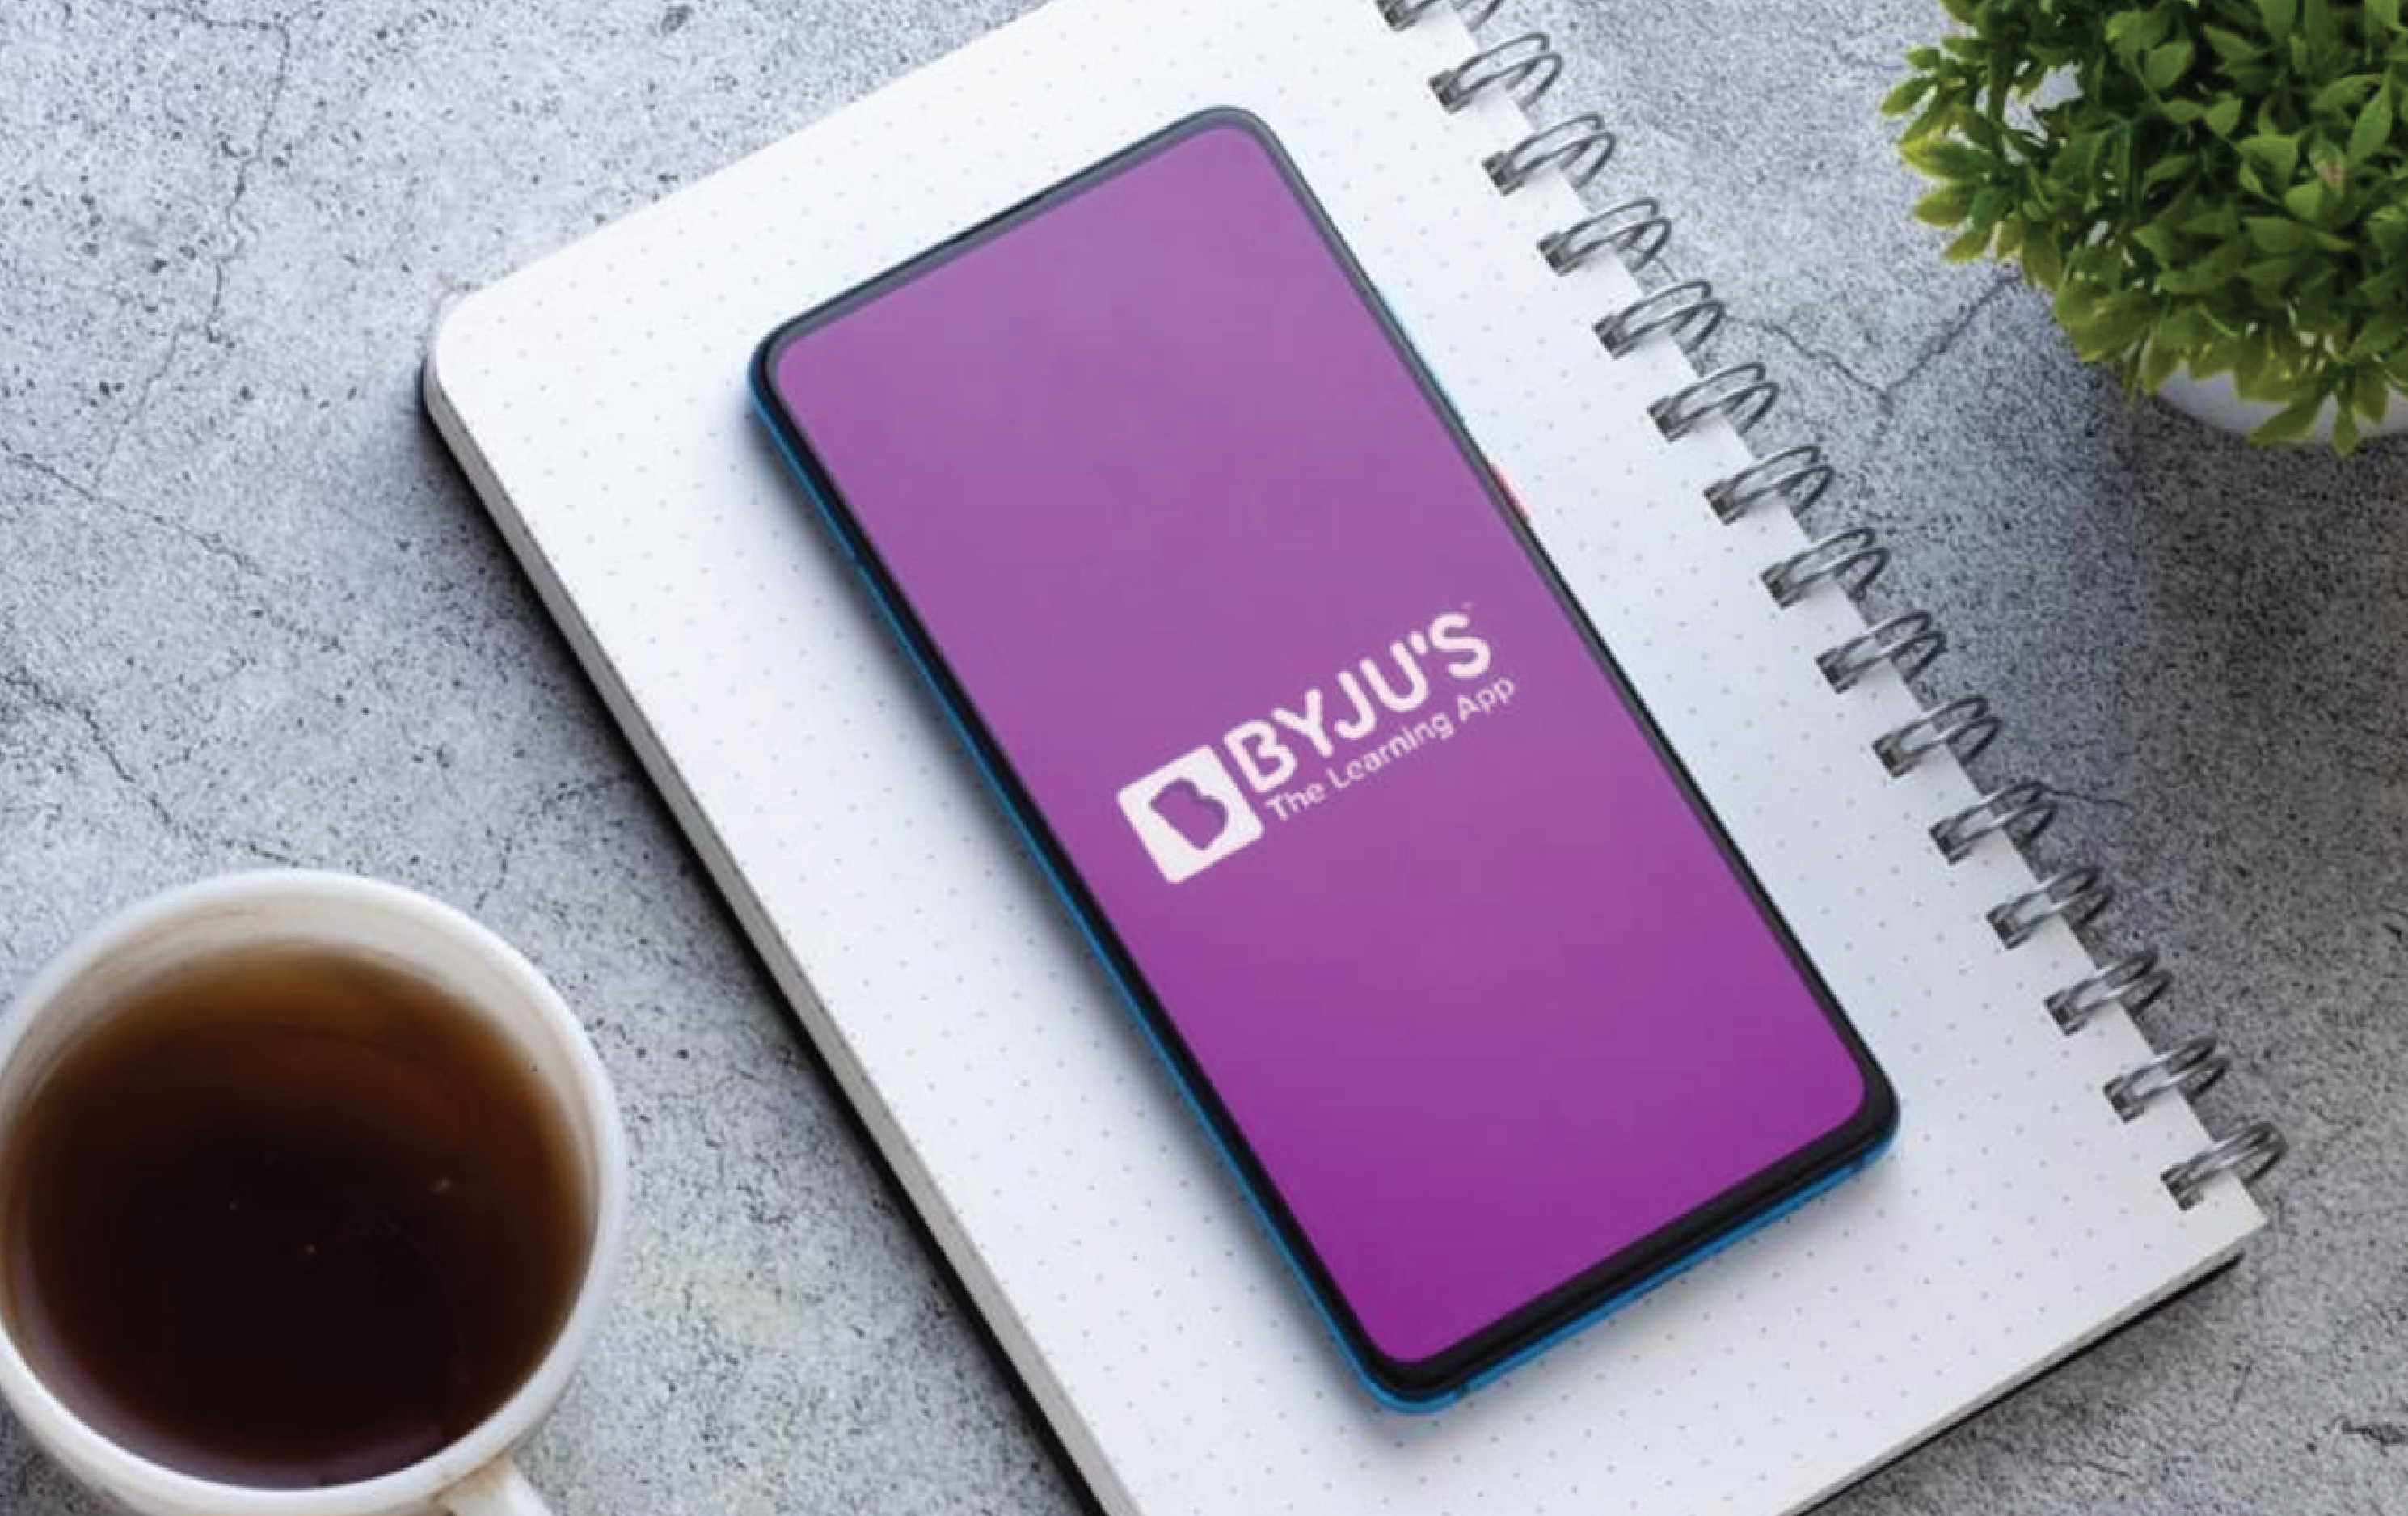 BYJUS borrows Rs 300 crore from its affiliated tuition chain Aakash